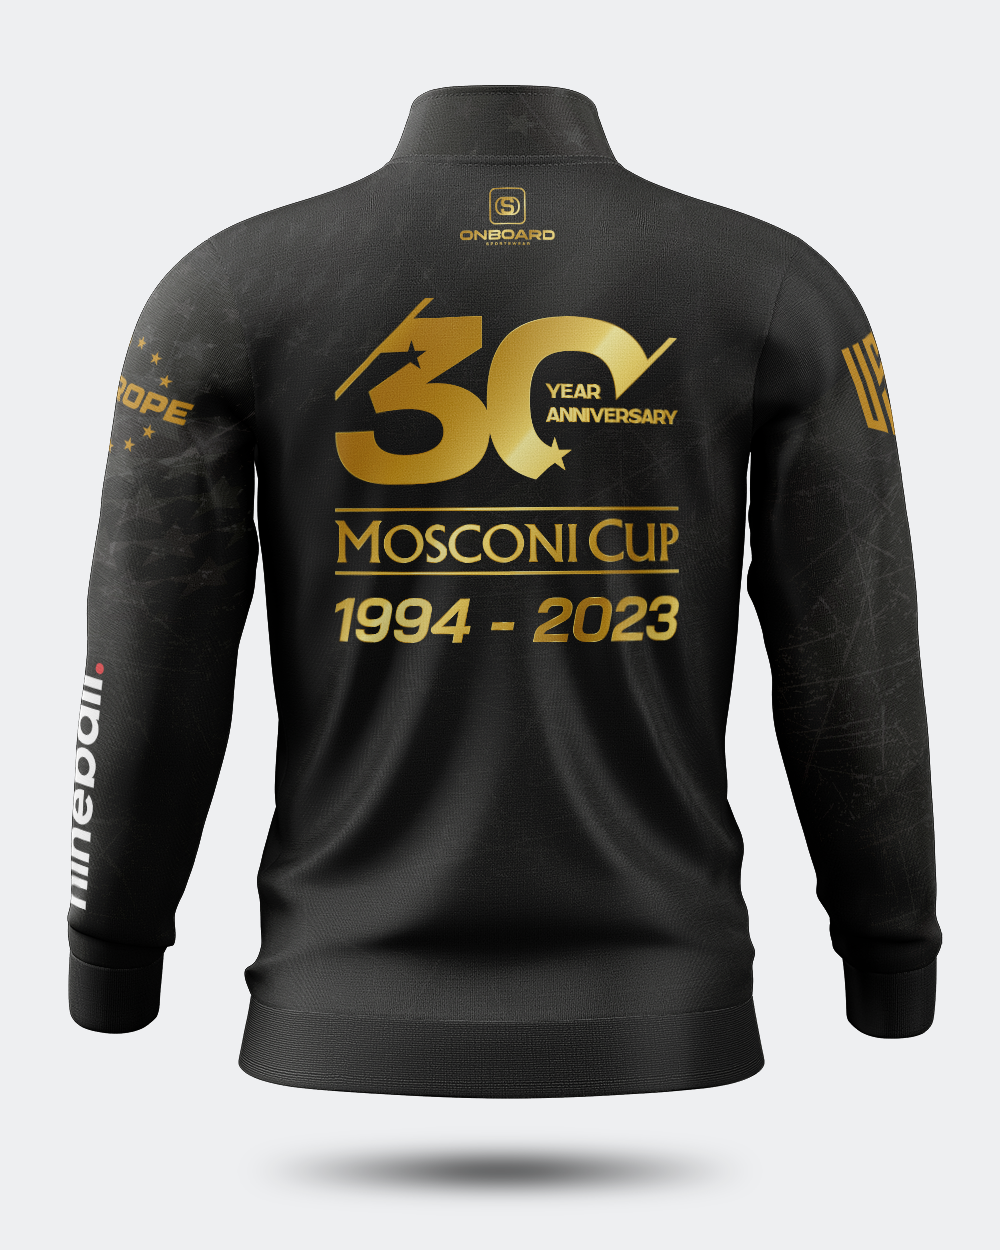 Mosconi Cup 30th Anniversary Tournament Jacket